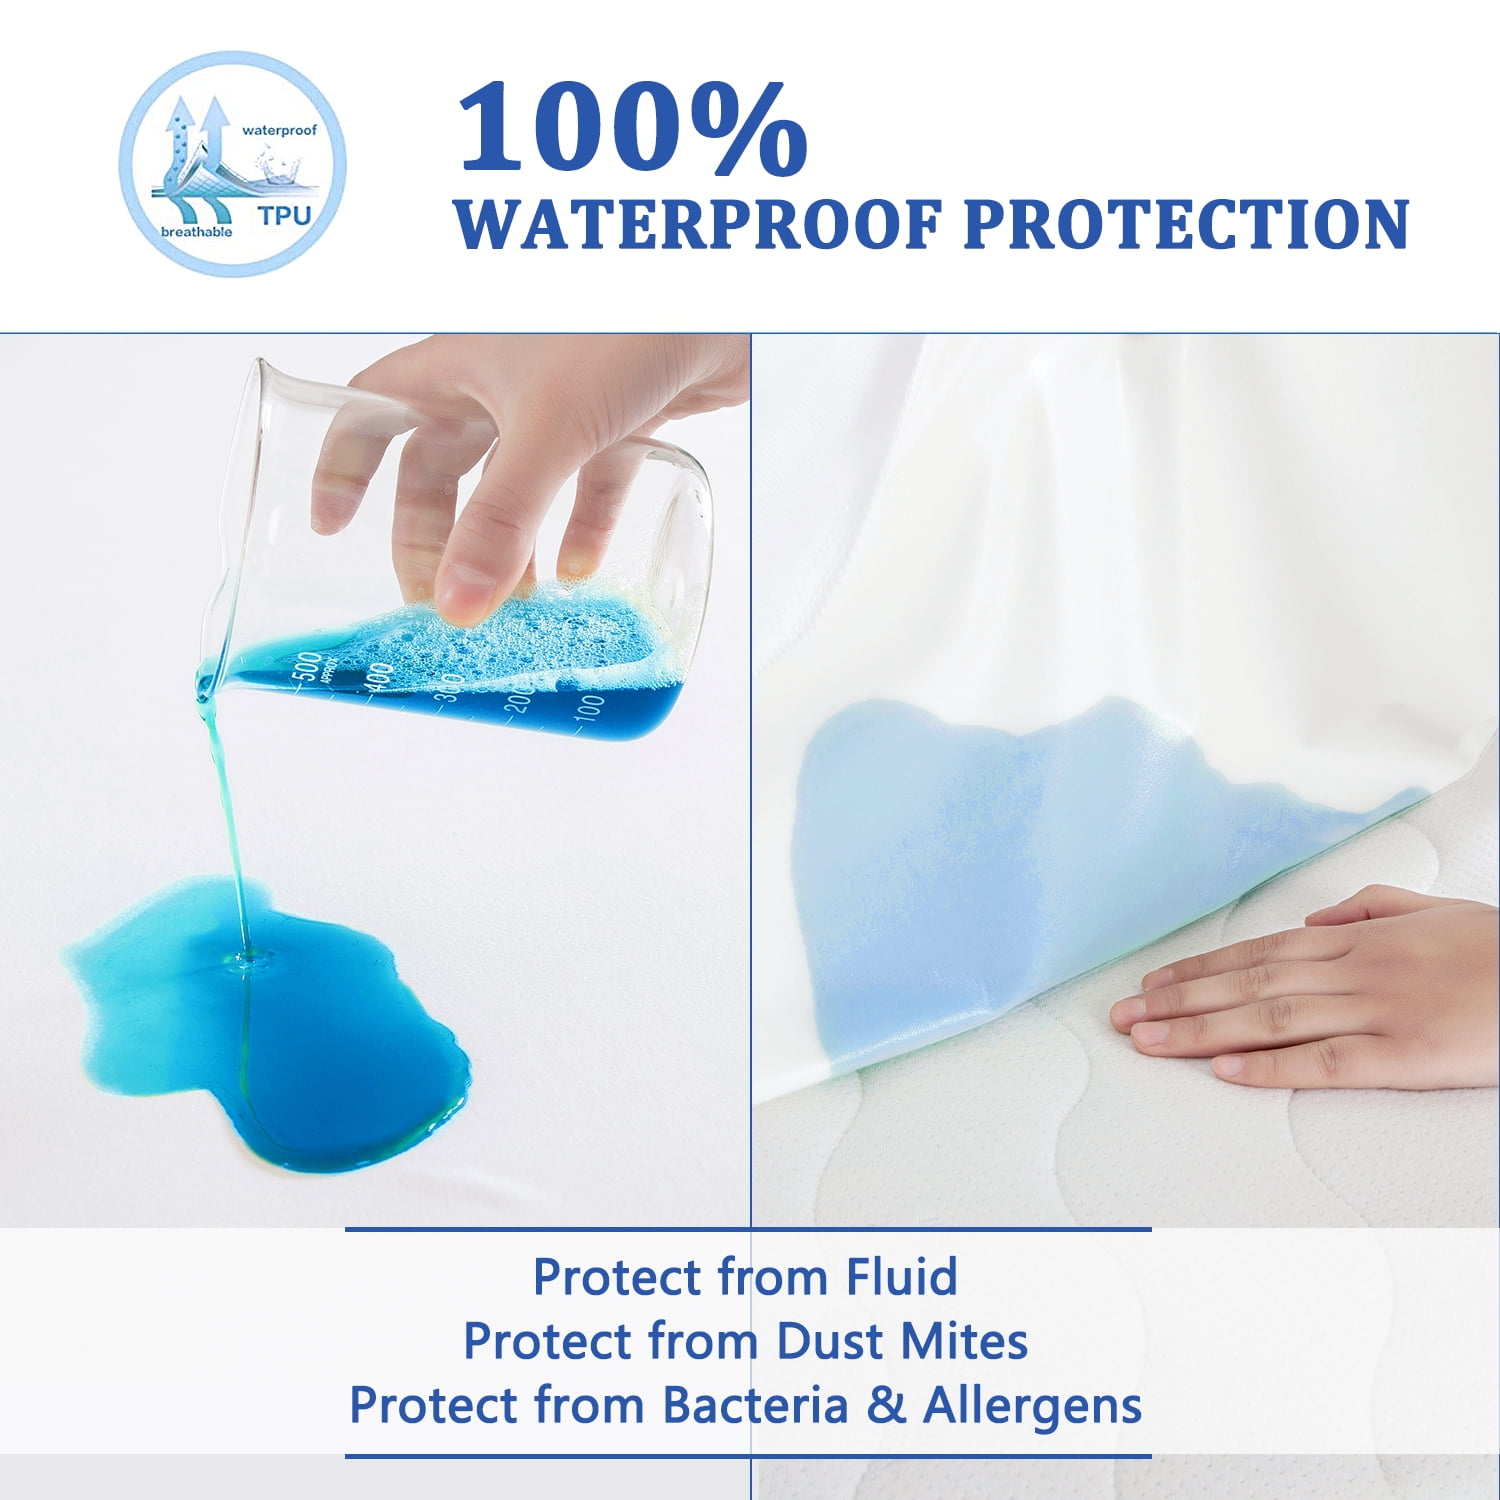 Breathable and waterproof protection